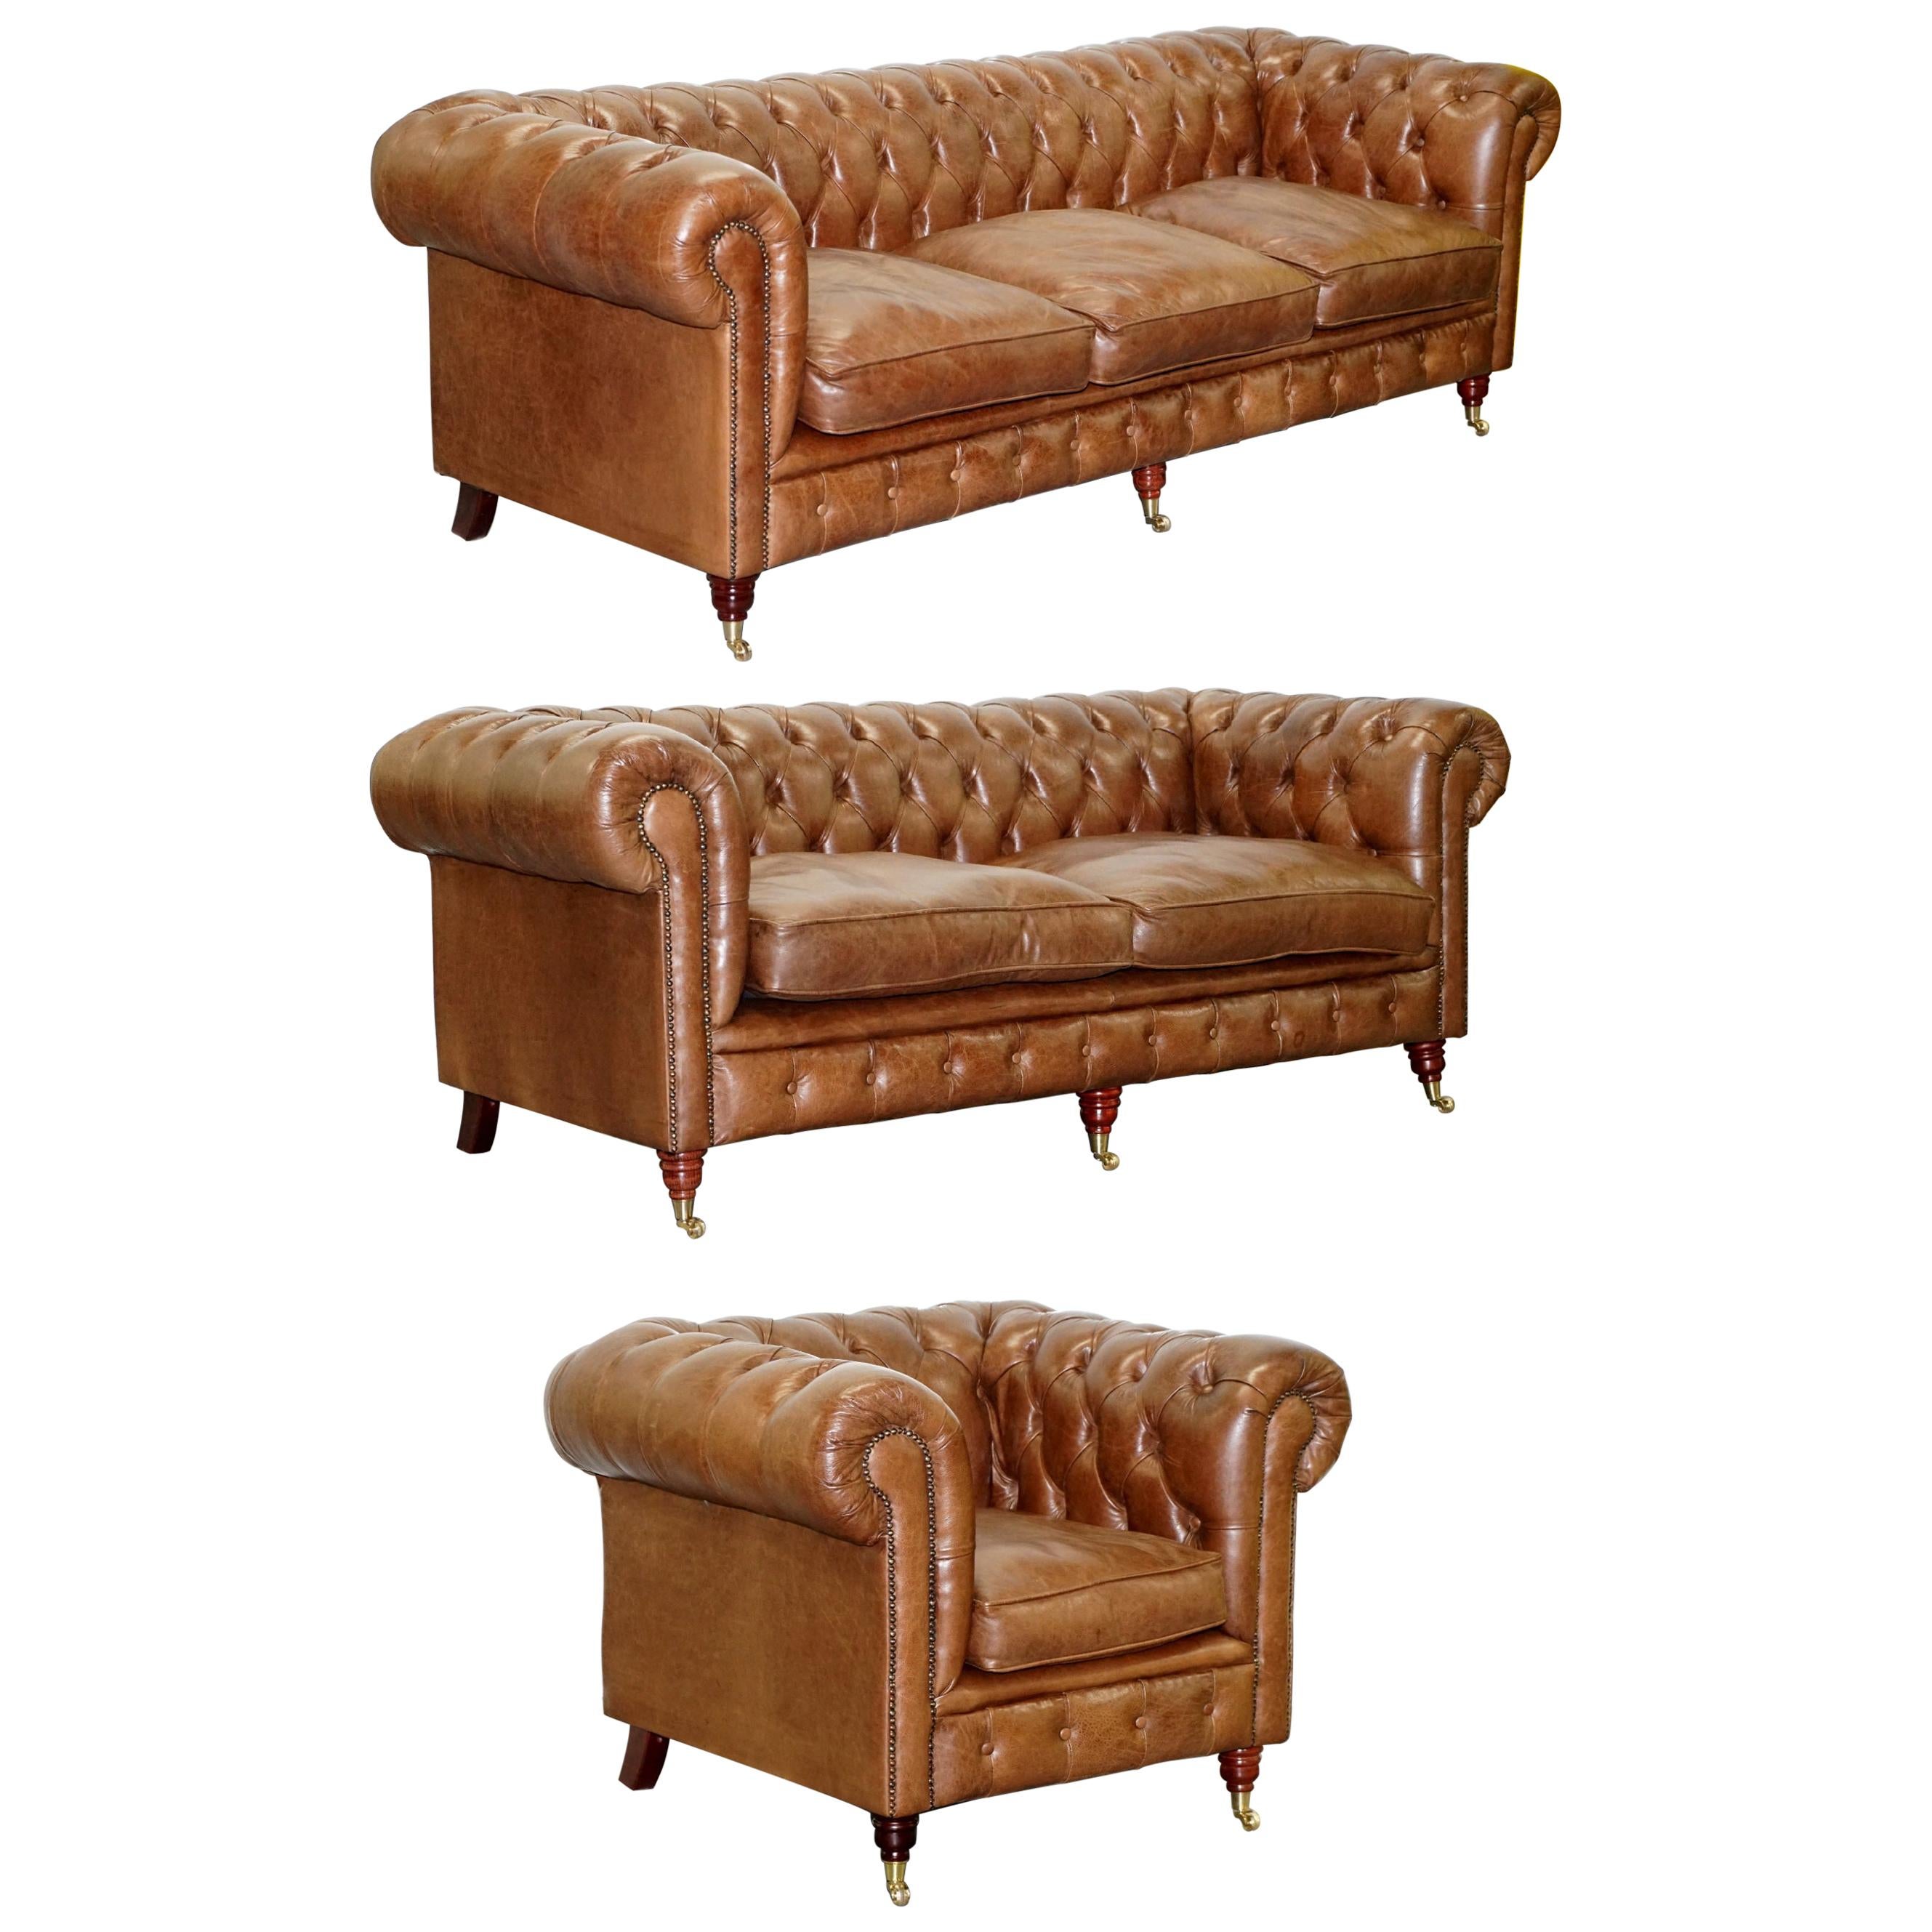 Chesterfield Heritage Brown Leather Sofas & Armchair Suite 2-3 3-4 Seat Sofas